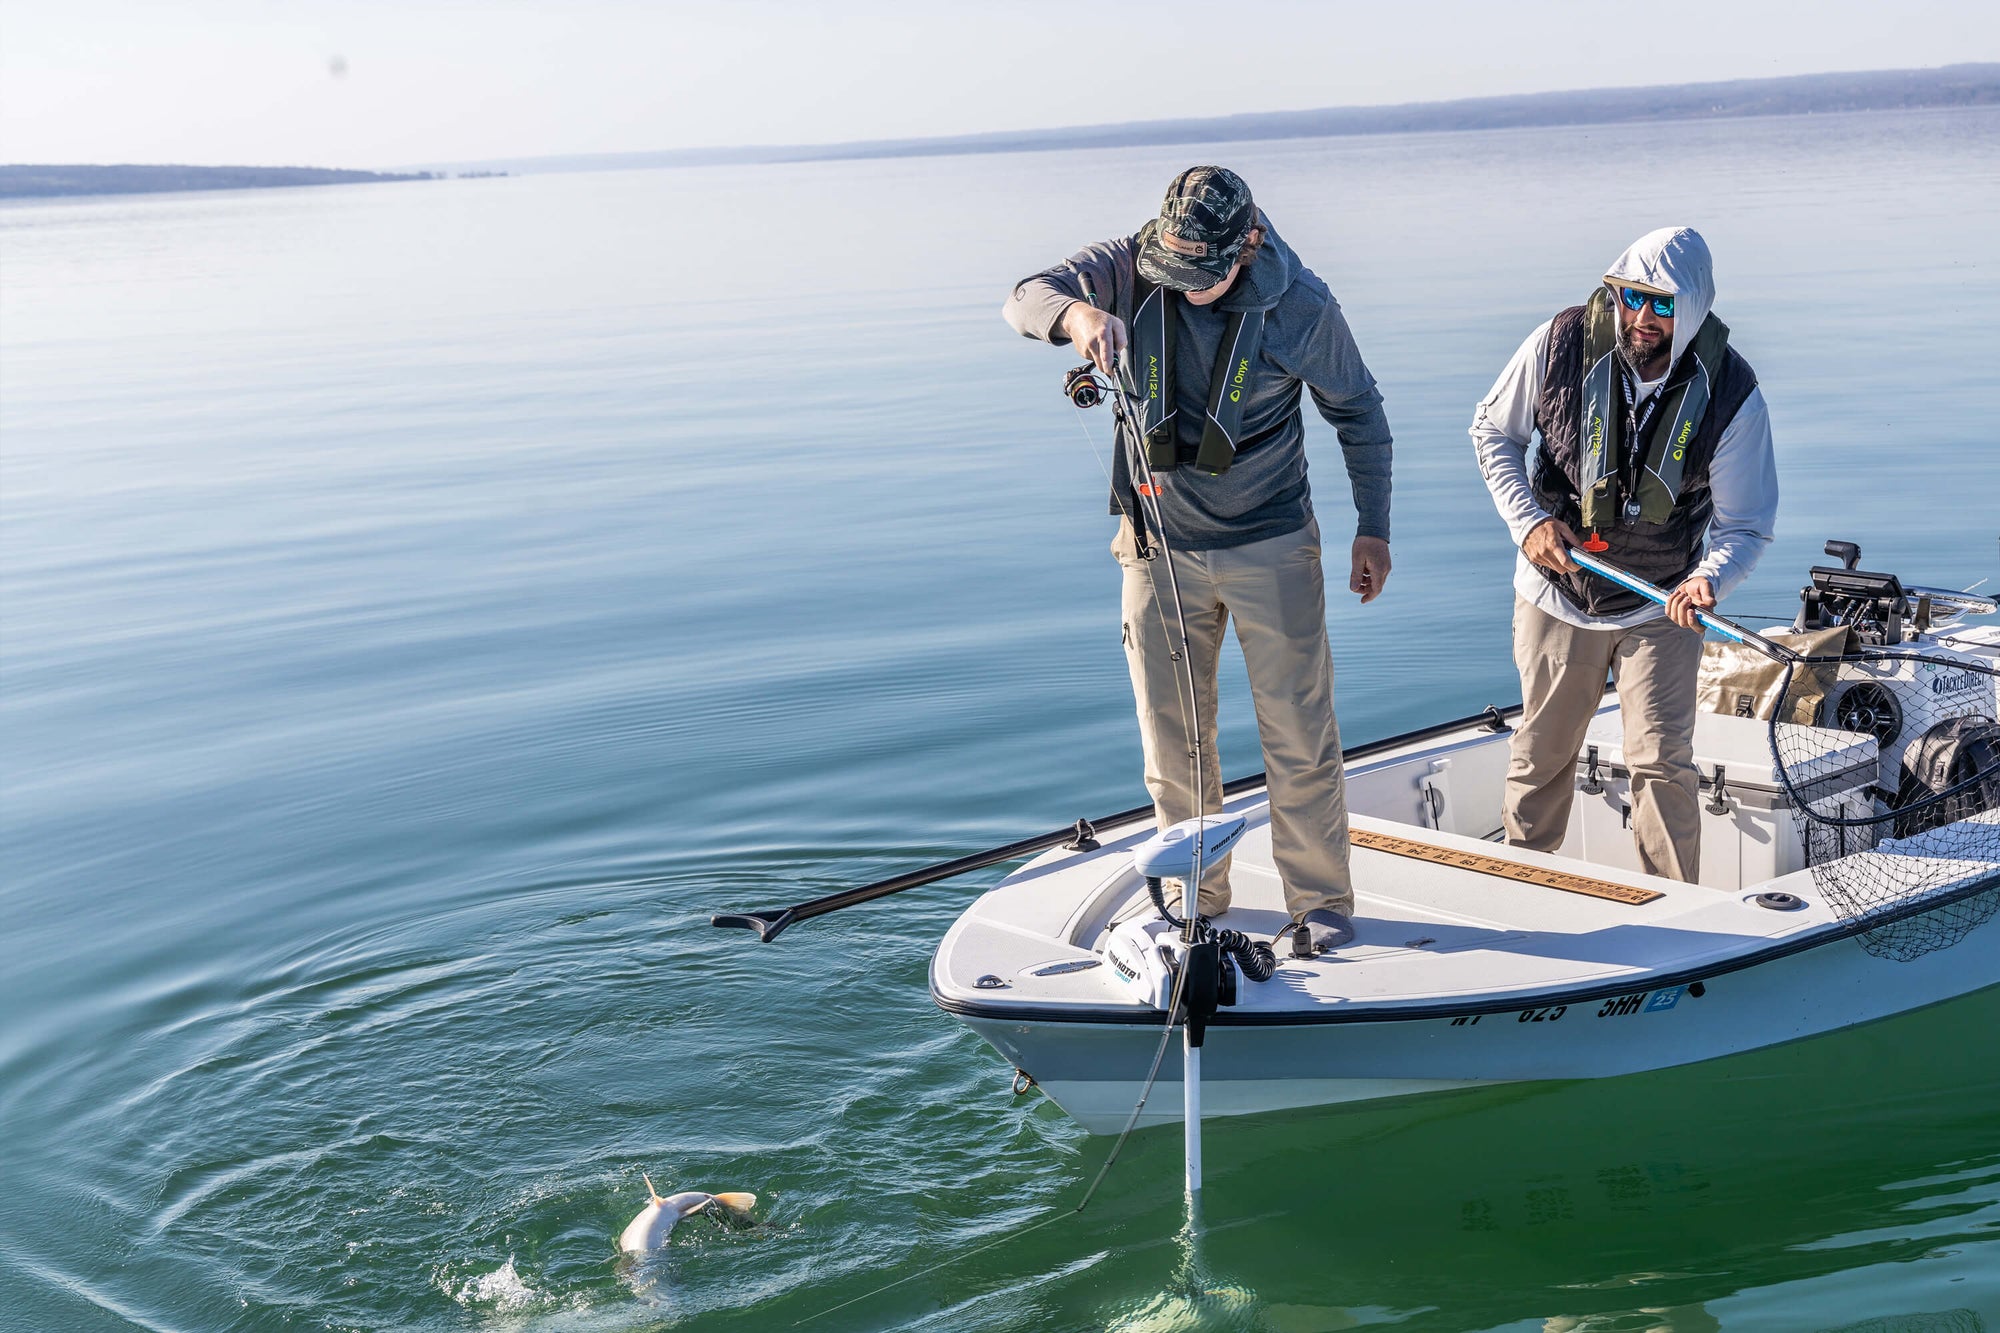 Two anglers are standing on a boat. One has prepared the net, while the other is reeling in the fish he caught. 